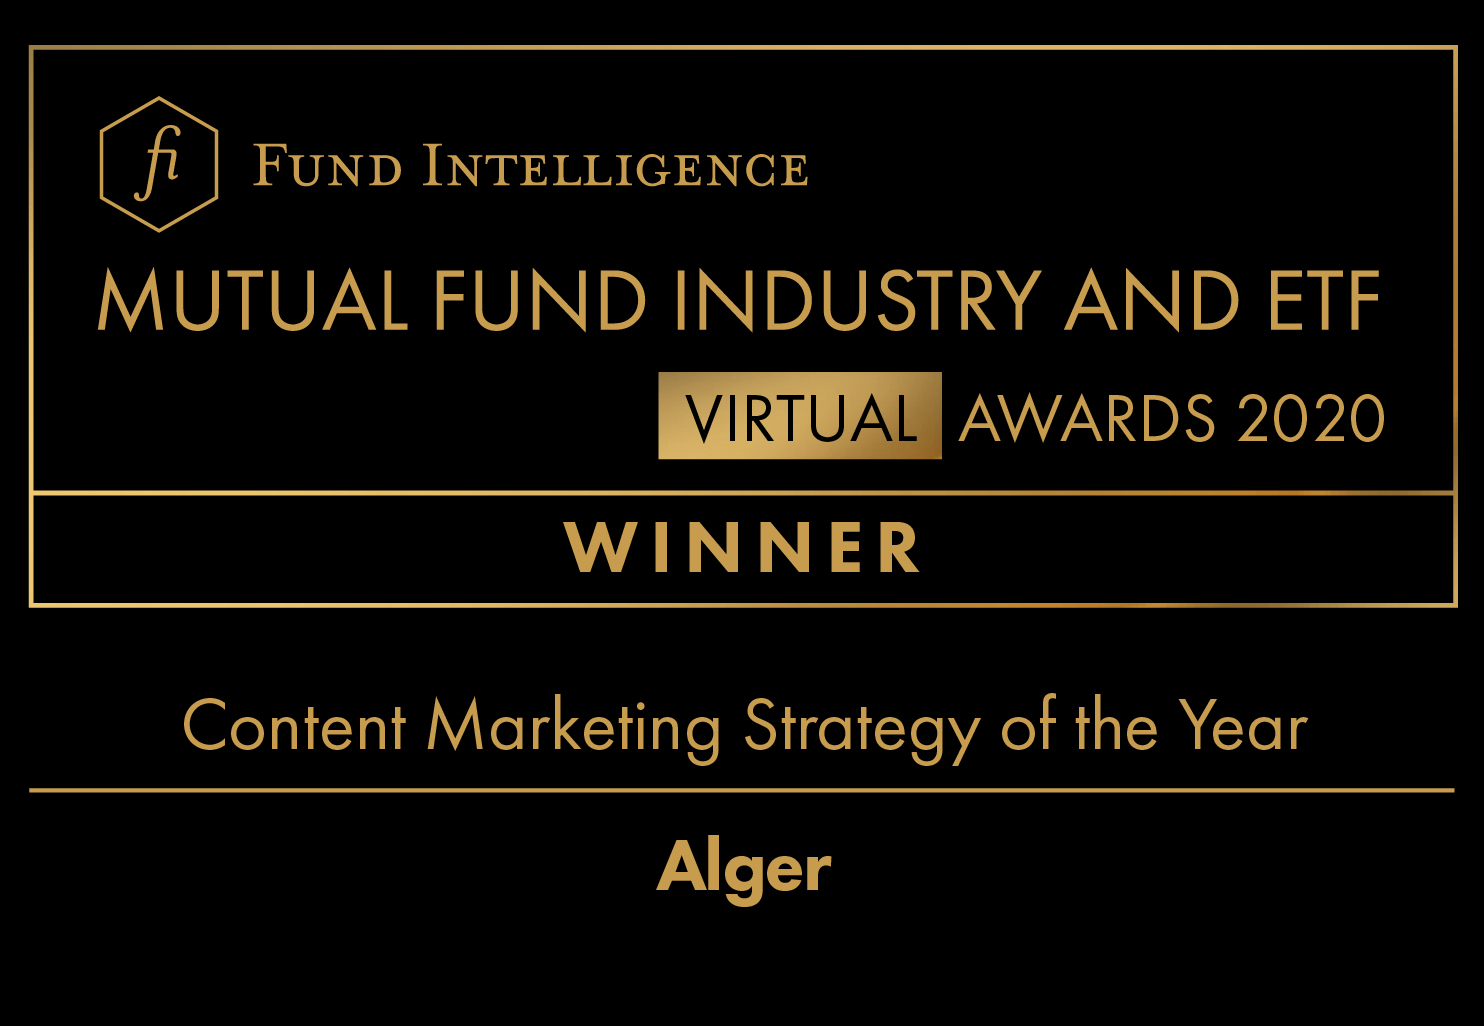 Award graphic for the Fund Intelligence Mutual Fund Industry and ETF Virtual Awards 2020